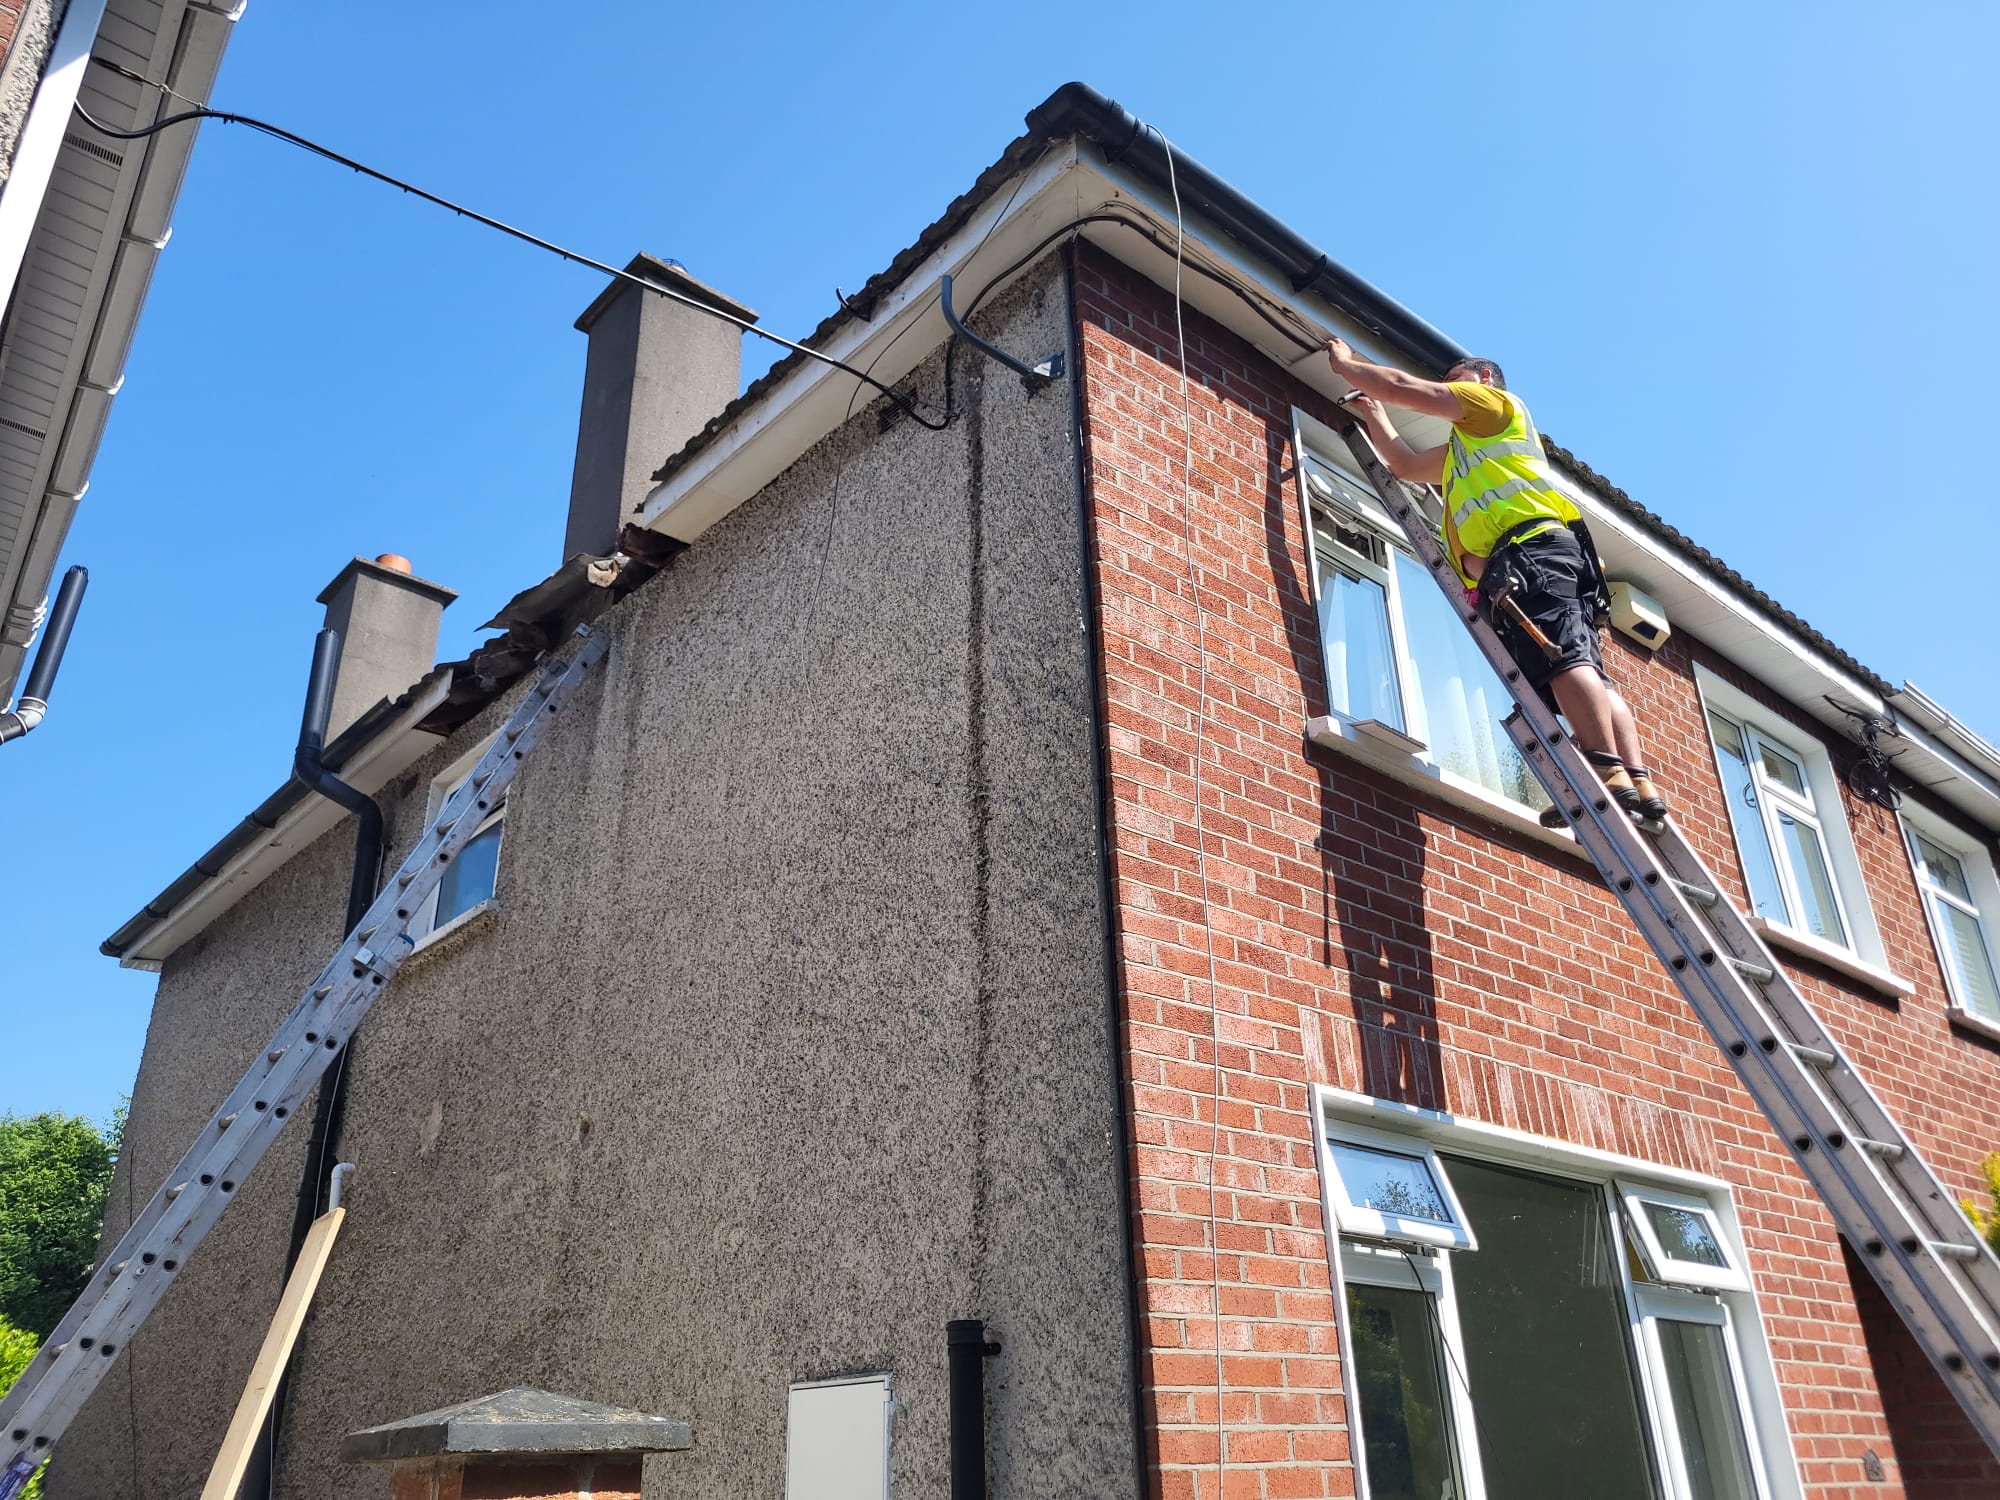 Roofing Contractors Maynooth